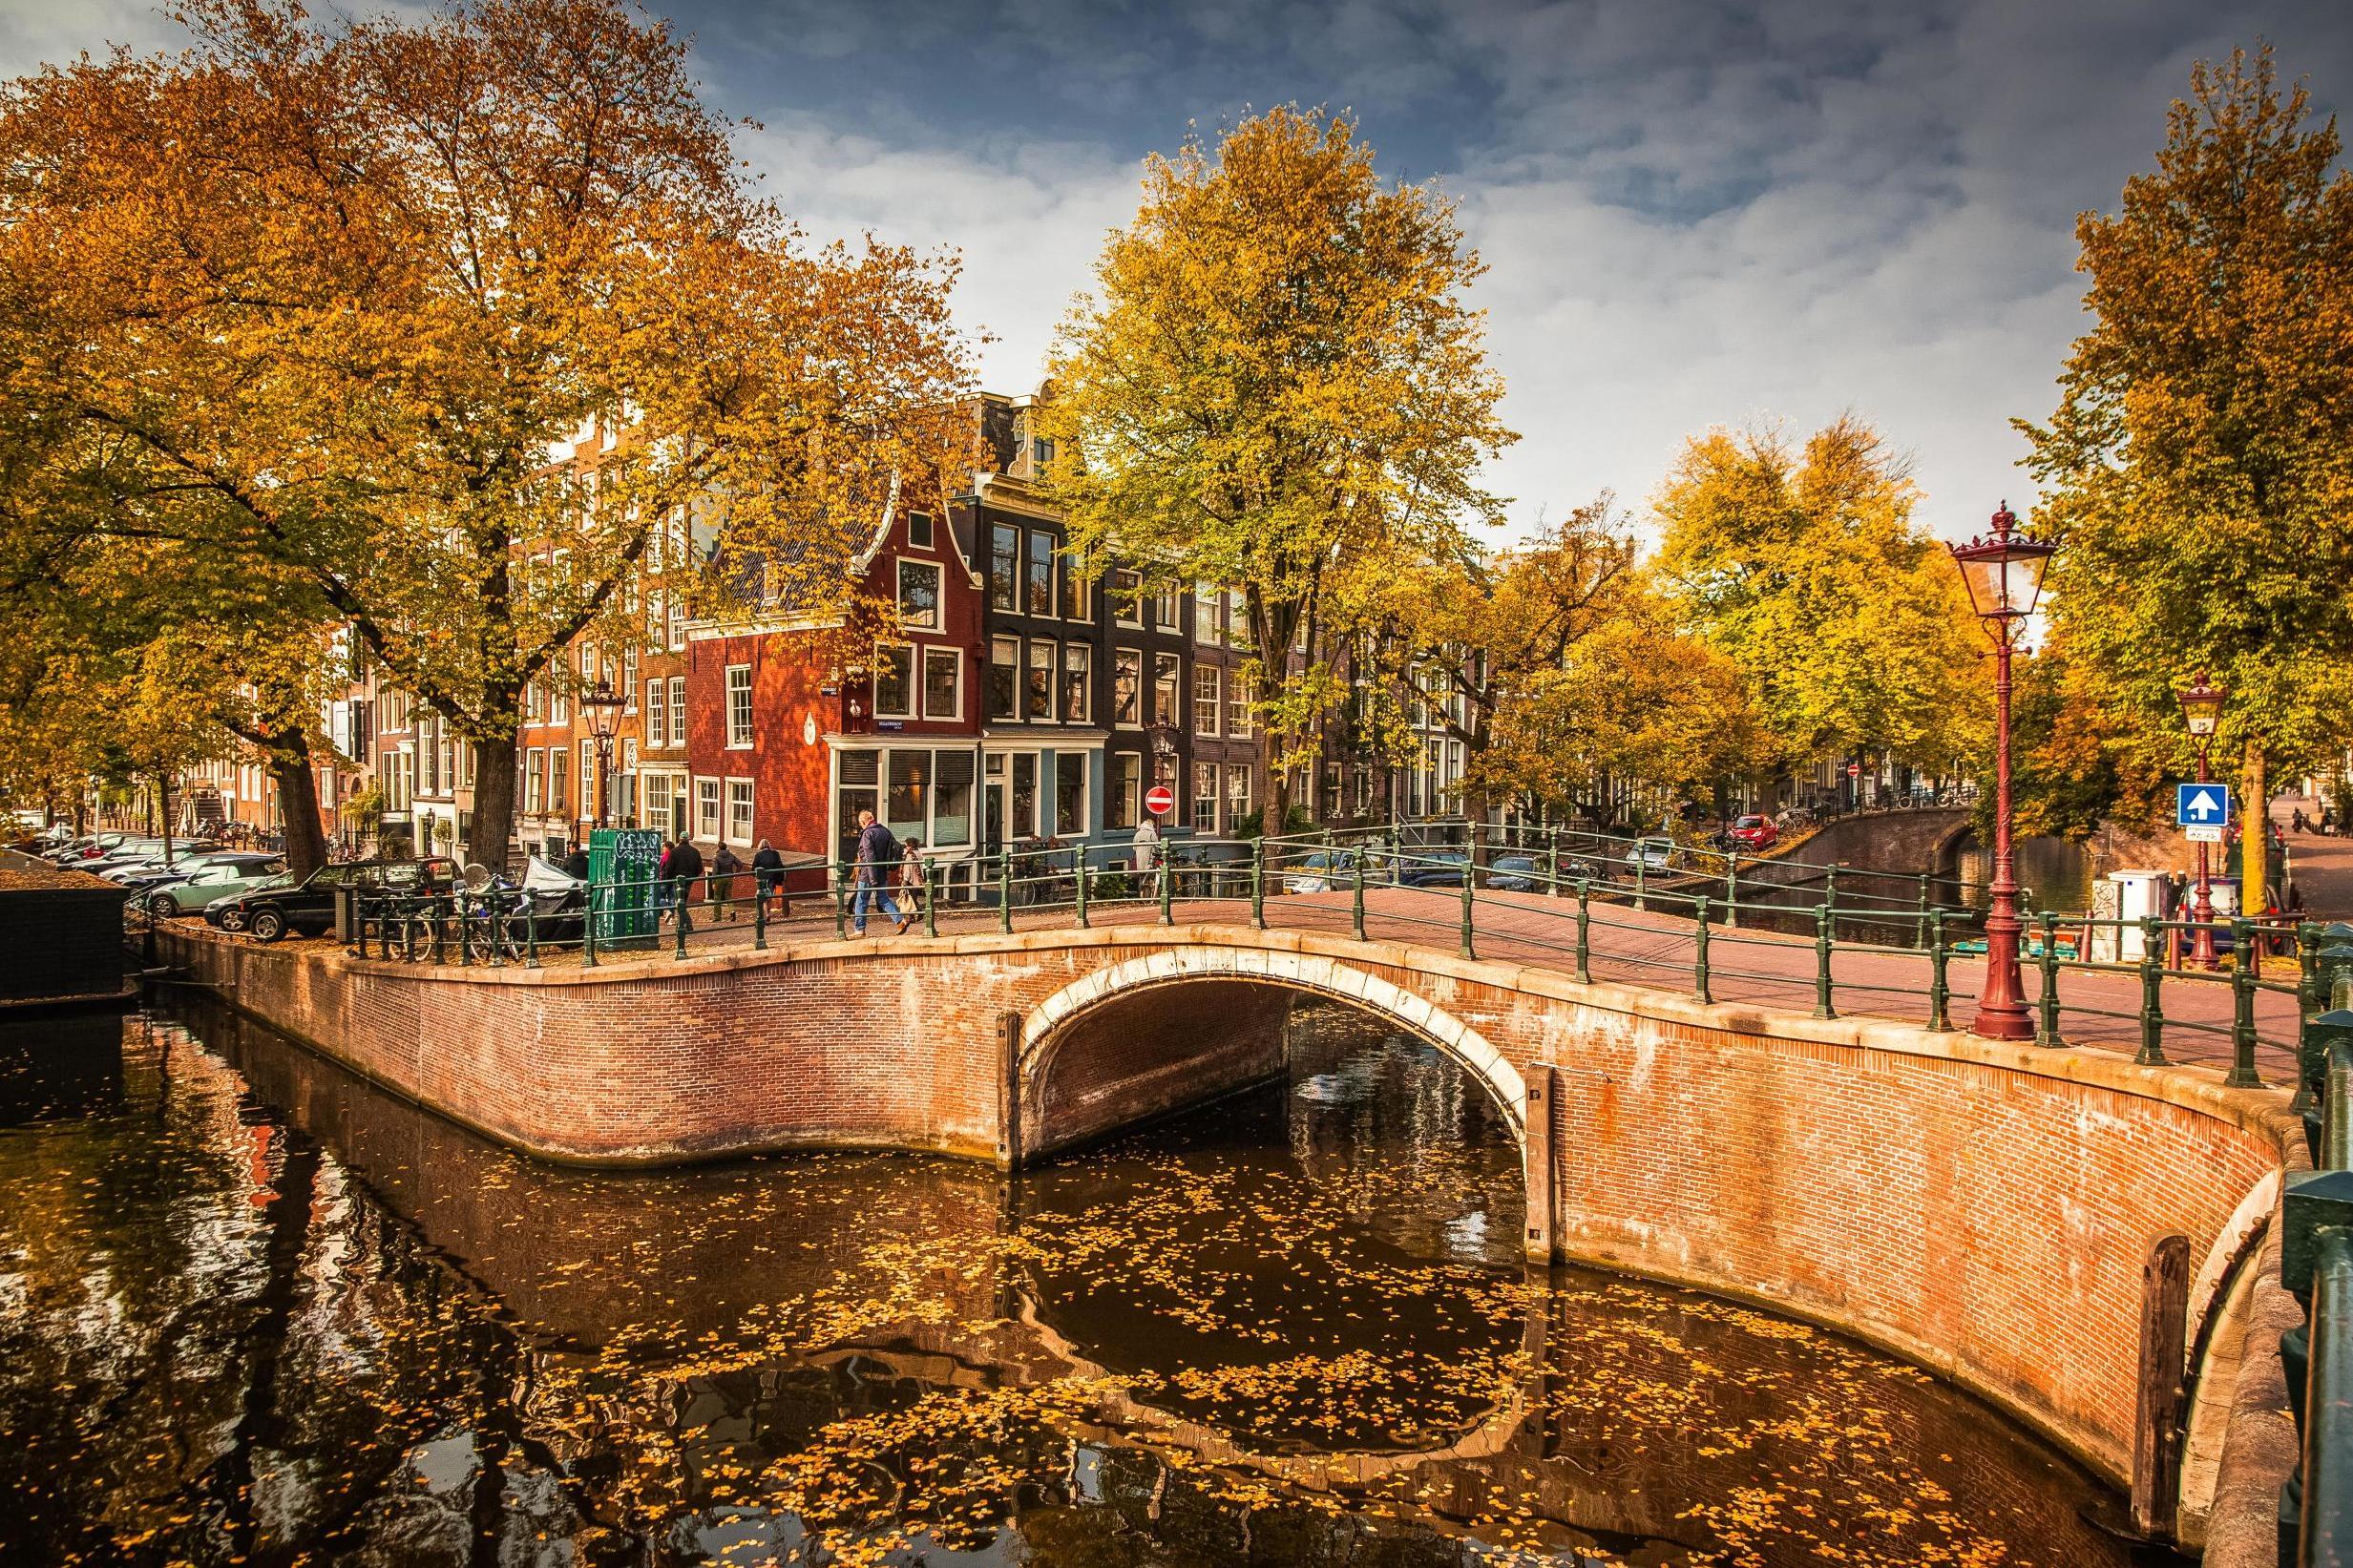 Amsterdam boutique hotels: The best places to stay